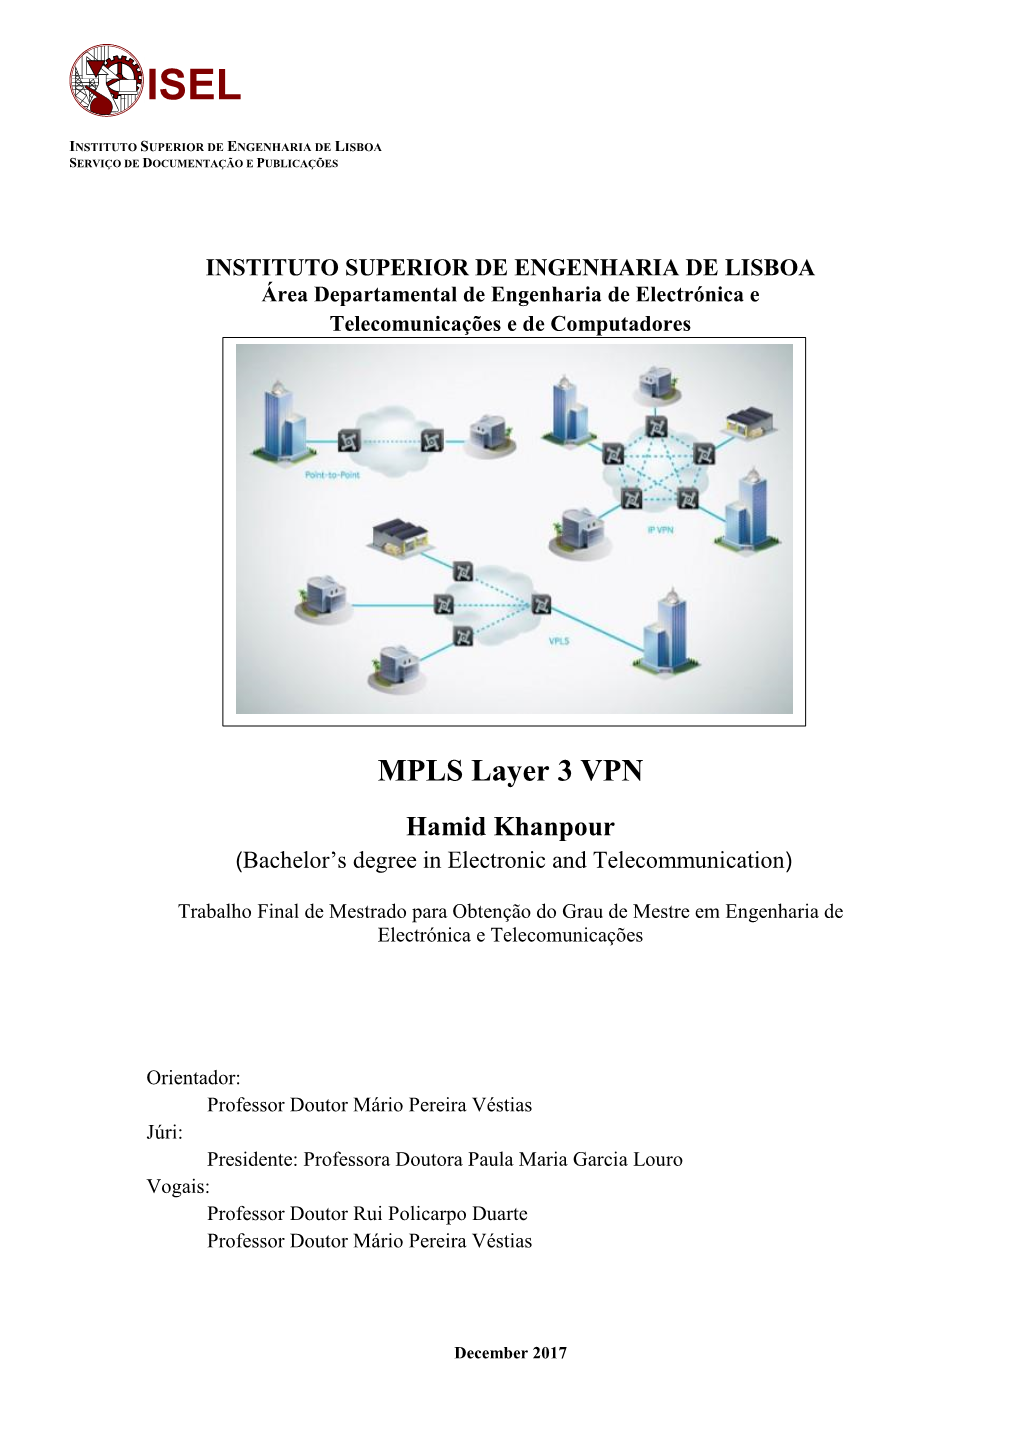 MPLS Layer 3 VPN Hamid Khanpour (Bachelor’S Degree in Electronic and Telecommunication)